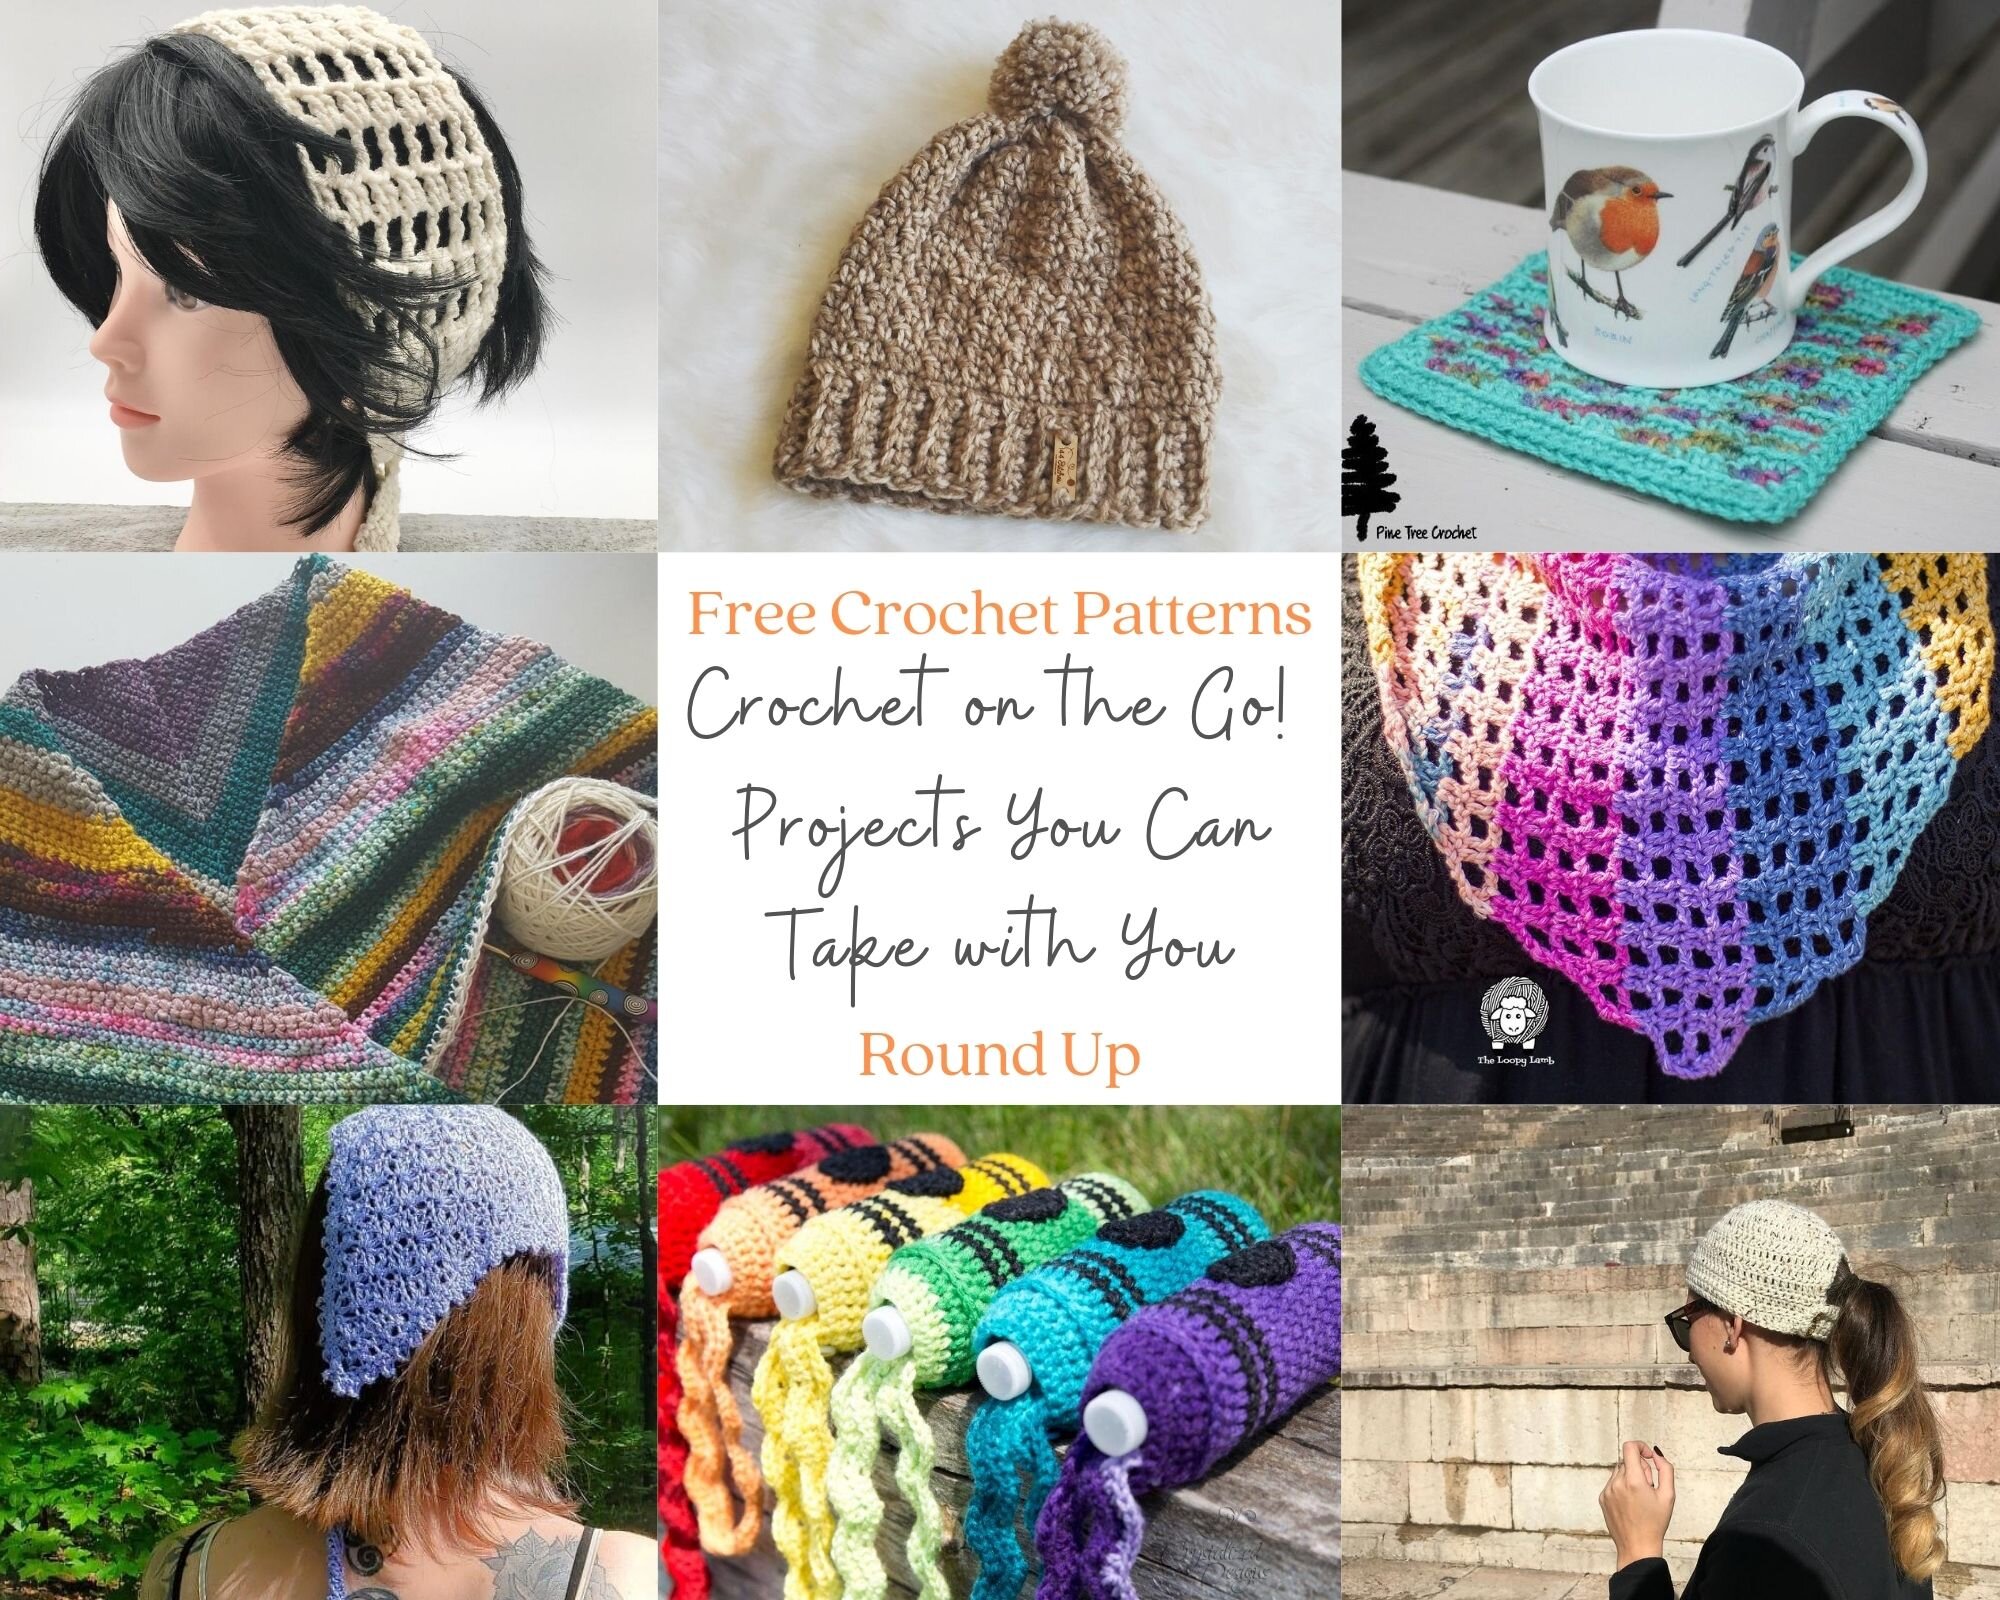 Crochet Kit: Everything You Need For A Successful Crochet Session